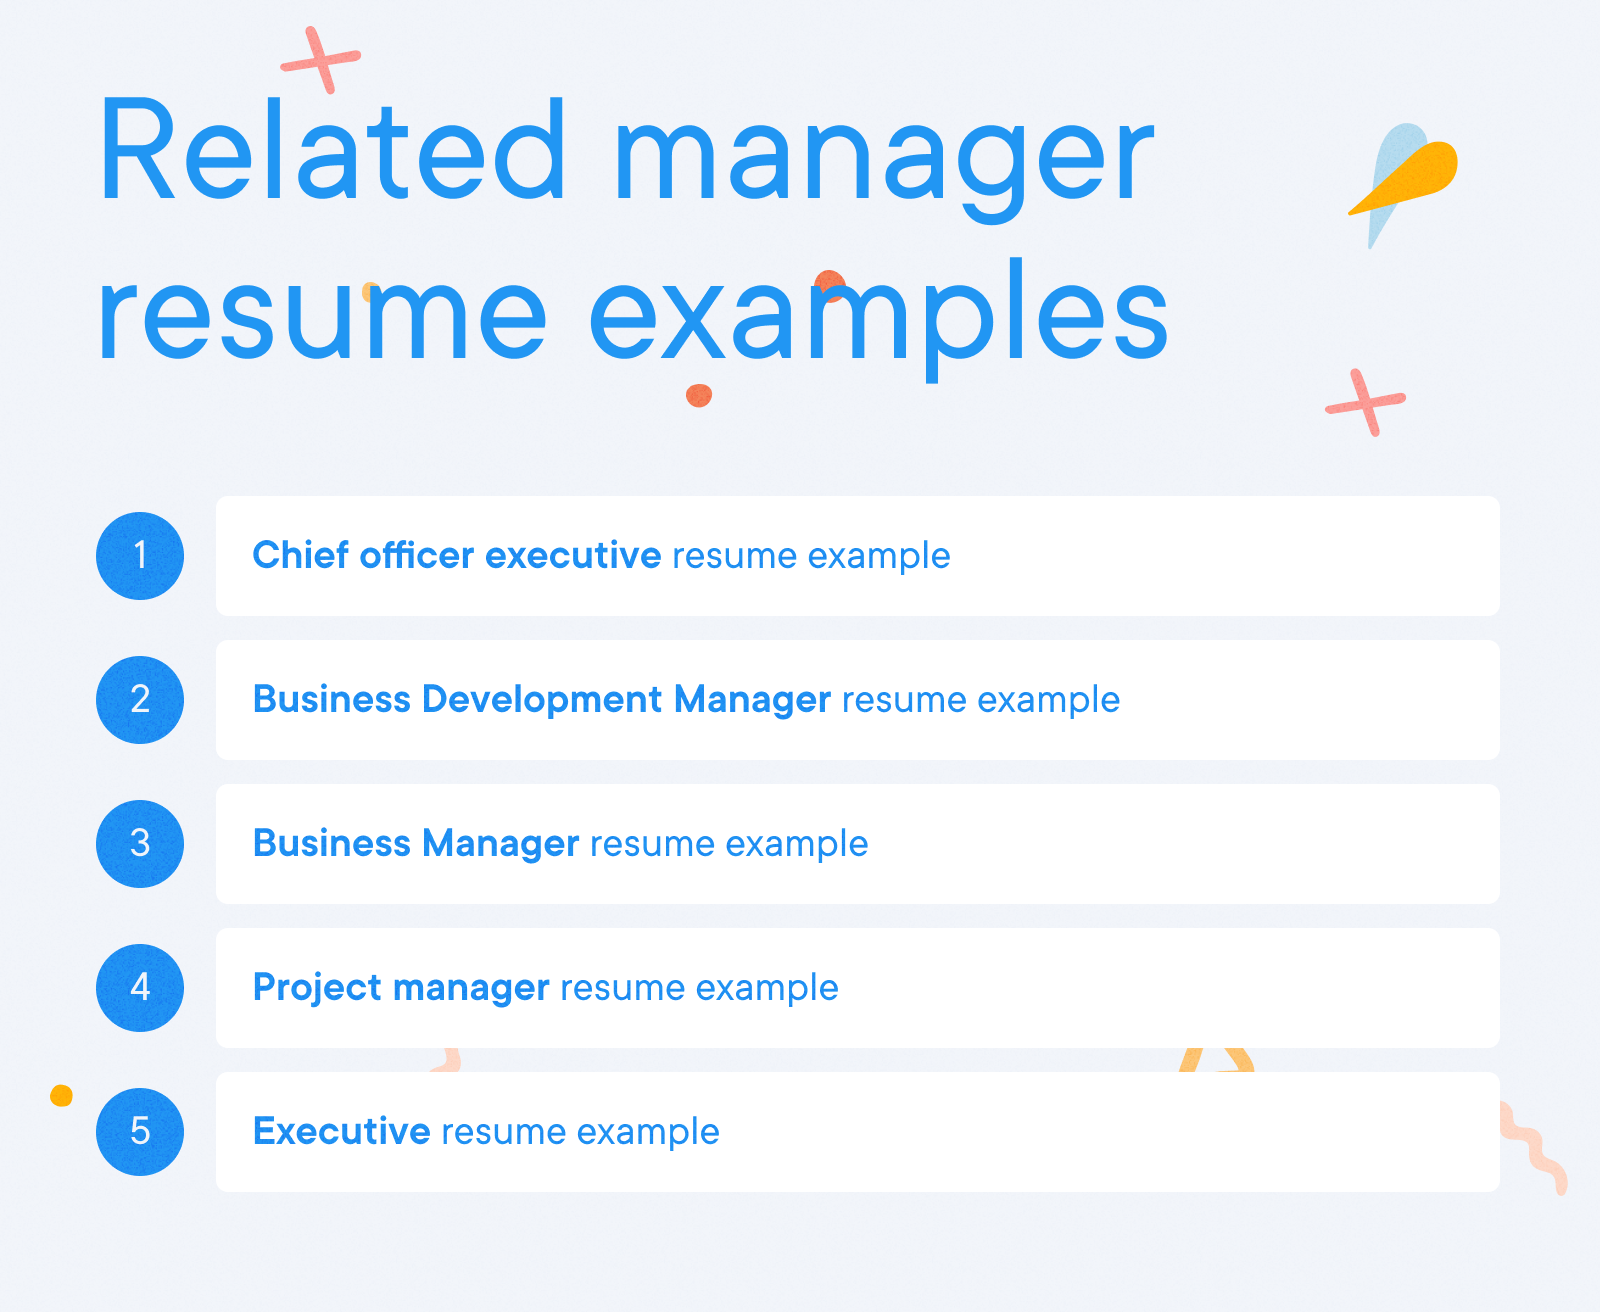 Manager Resume Example - Related manager resume examples